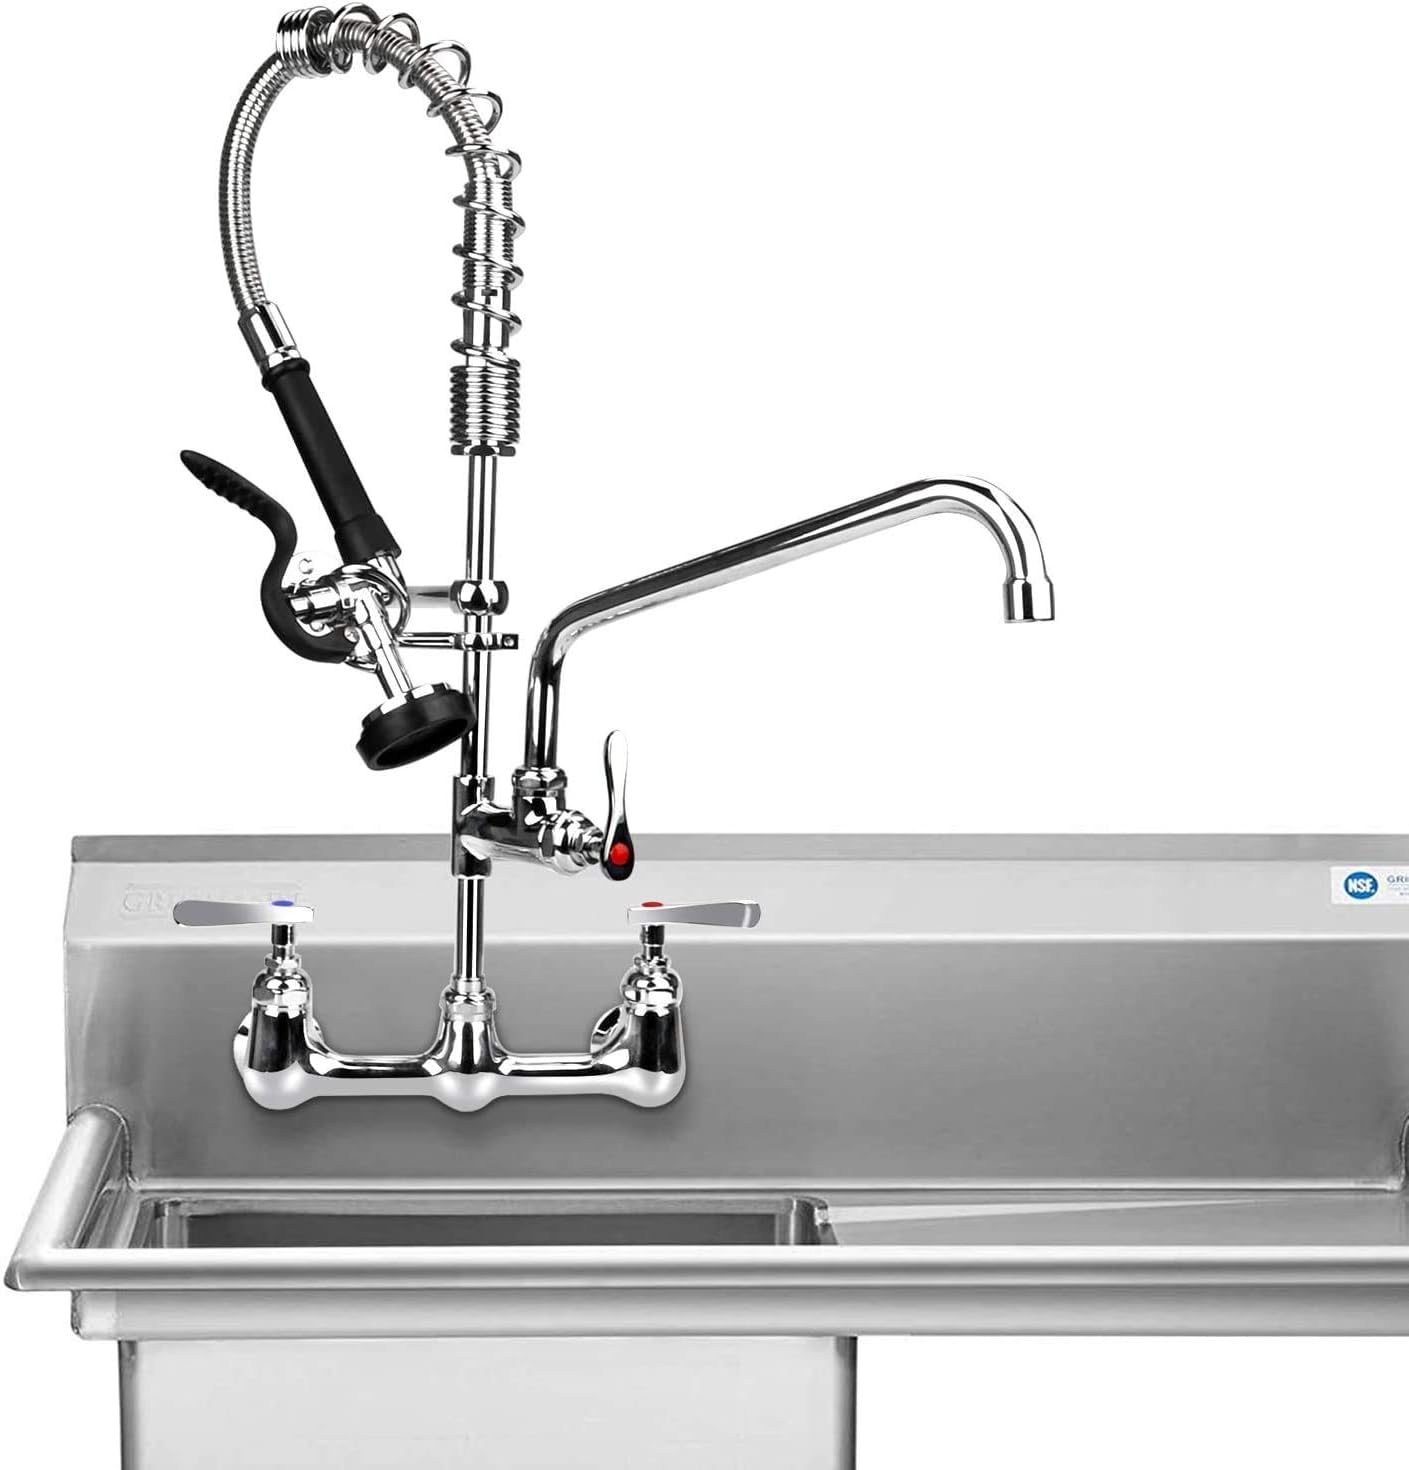 TNROTED 8 inch Center Commercial Faucet with Pre-Rinse Sprayer, 25" Height Commercial Wall Mount Restaurant Kitchen Sink Faucet and 12" Swivel Spout Fit for 1 or 2 Compartment Sink, Brass Chrome